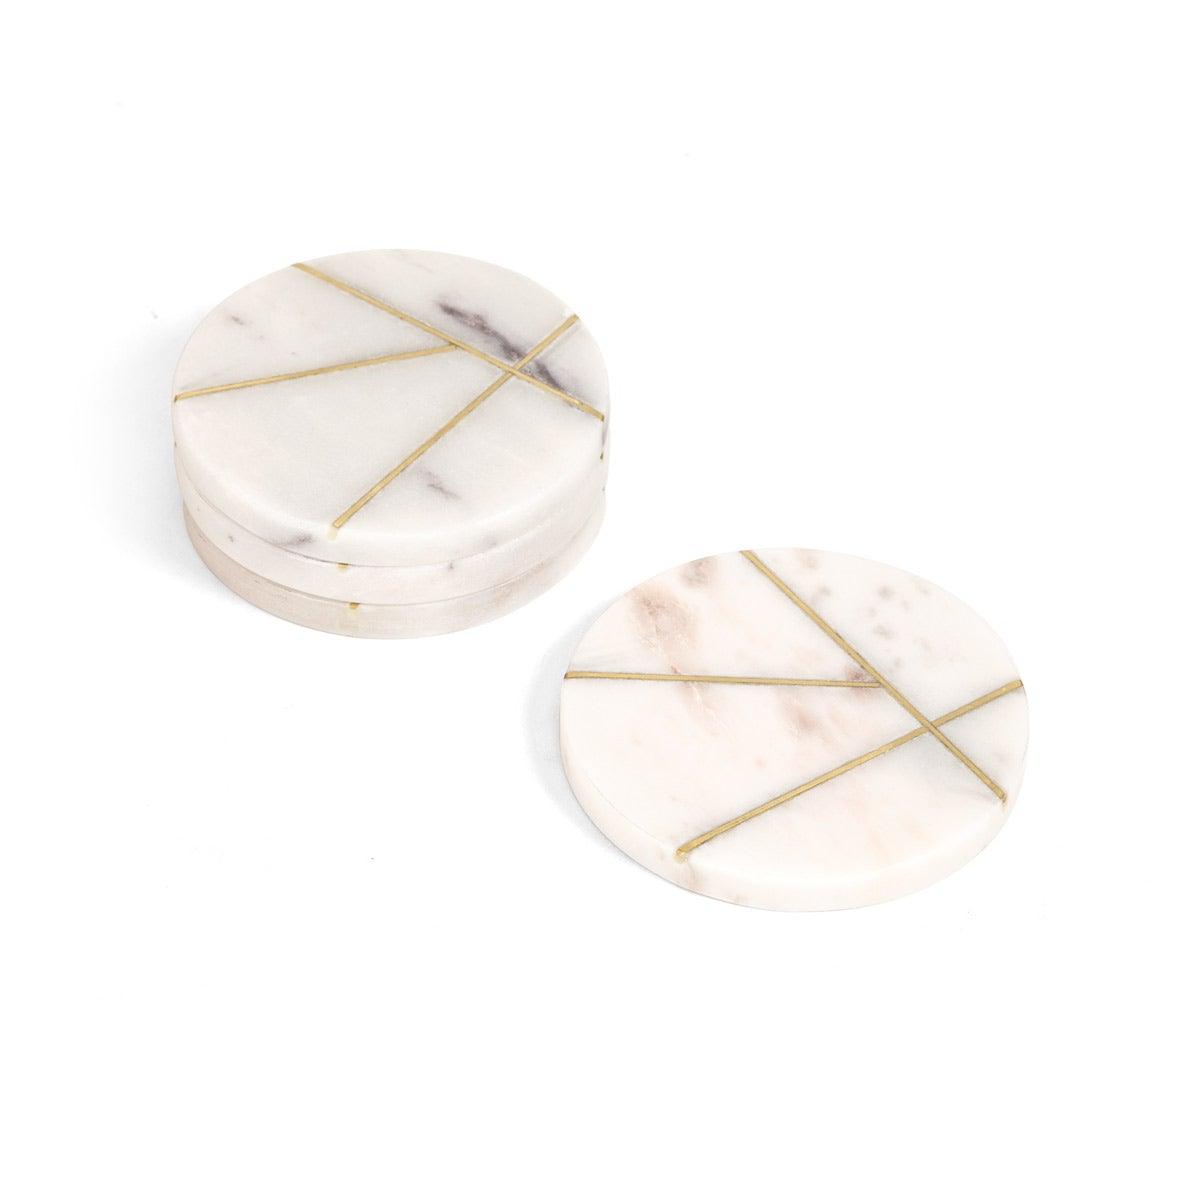 Audrey Round Coaster Set of 4 White Marble with brass stripes